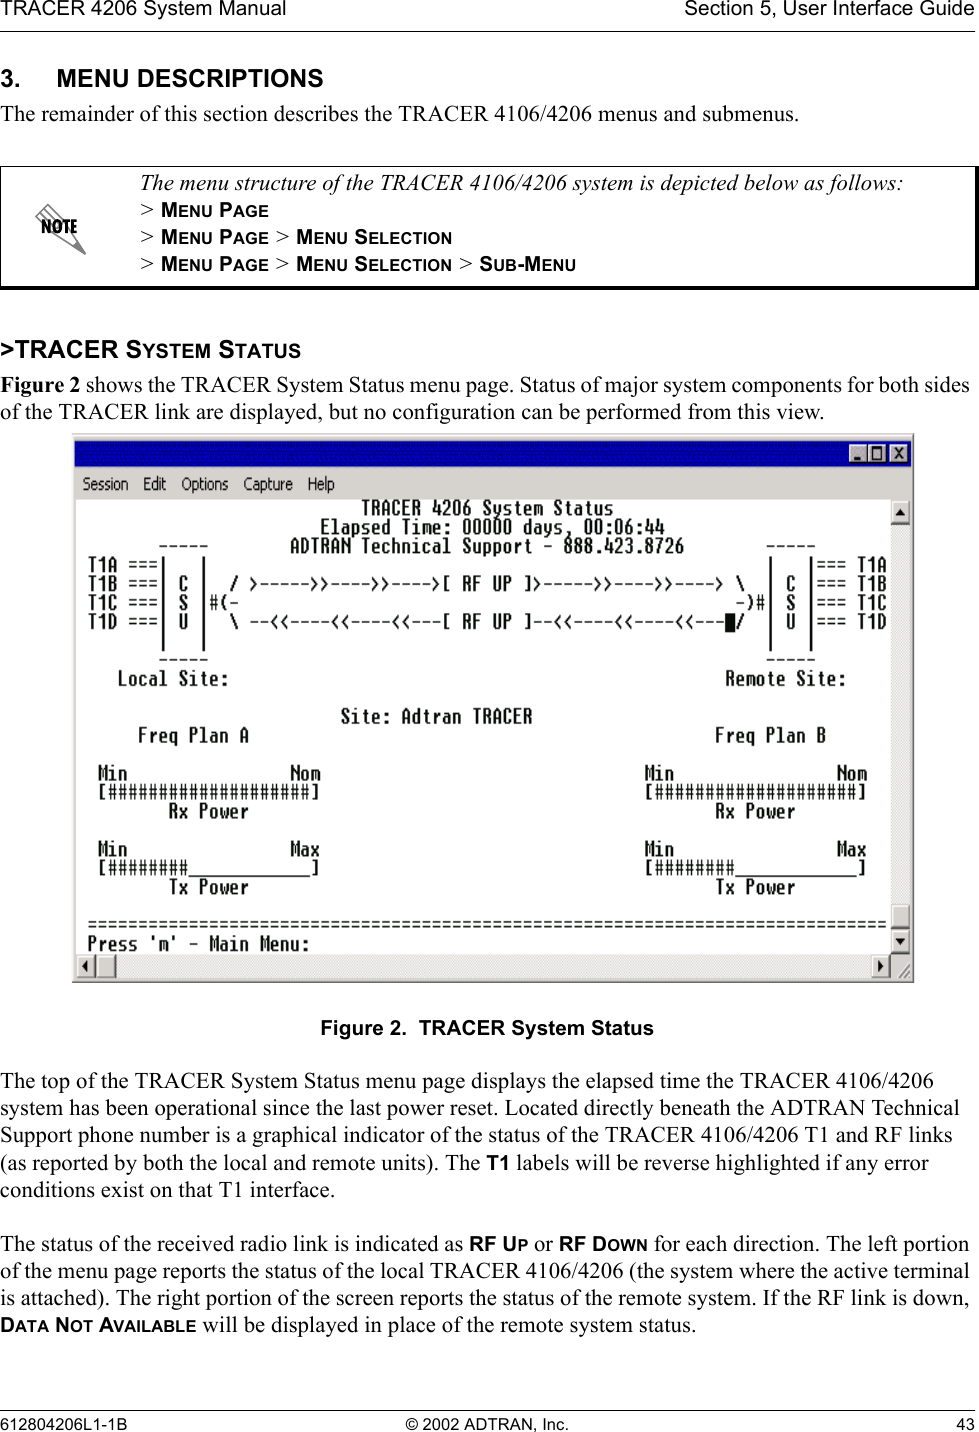 TRACER 4206 System Manual Section 5, User Interface Guide612804206L1-1B © 2002 ADTRAN, Inc. 433. MENU DESCRIPTIONSThe remainder of this section describes the TRACER 4106/4206 menus and submenus. &gt;TRACER SYSTEM STATUSFigure 2 shows the TRACER System Status menu page. Status of major system components for both sides of the TRACER link are displayed, but no configuration can be performed from this view.Figure 2.  TRACER System StatusThe top of the TRACER System Status menu page displays the elapsed time the TRACER 4106/4206 system has been operational since the last power reset. Located directly beneath the ADTRAN Technical Support phone number is a graphical indicator of the status of the TRACER 4106/4206 T1 and RF links (as reported by both the local and remote units). The T1 labels will be reverse highlighted if any error conditions exist on that T1 interface.The status of the received radio link is indicated as RF UP or RF DOWN for each direction. The left portion of the menu page reports the status of the local TRACER 4106/4206 (the system where the active terminal is attached). The right portion of the screen reports the status of the remote system. If the RF link is down, DATA NOT AVAILABLE will be displayed in place of the remote system status. The menu structure of the TRACER 4106/4206 system is depicted below as follows:&gt; MENU PAGE&gt; MENU PAGE &gt; MENU SELECTION&gt; MENU PAGE &gt; MENU SELECTION &gt; SUB-MENU